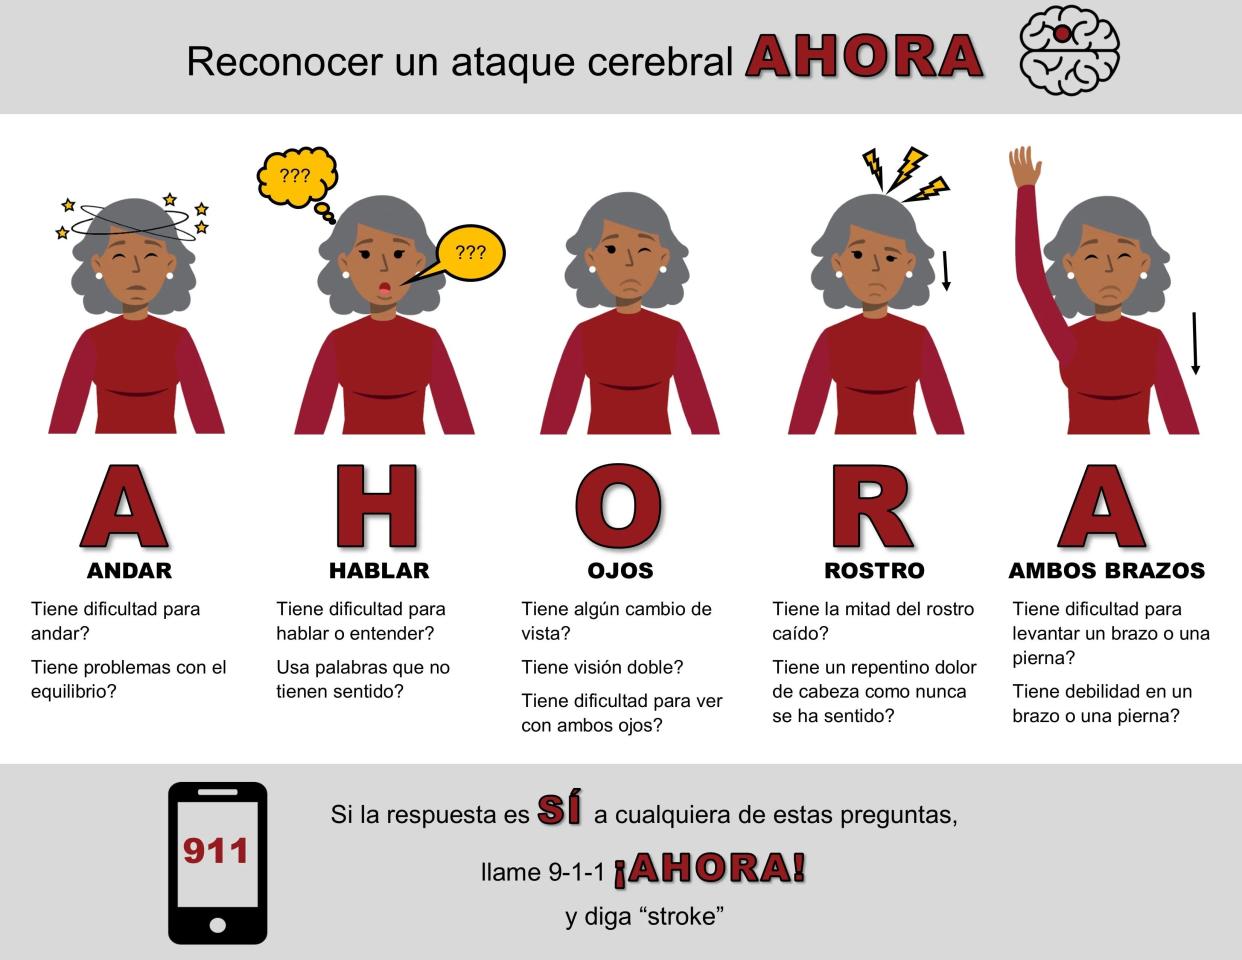 In Spanish, AHORA means "now." It's being used as a memory aid for Spanish speakers to spot the signs of a stroke.